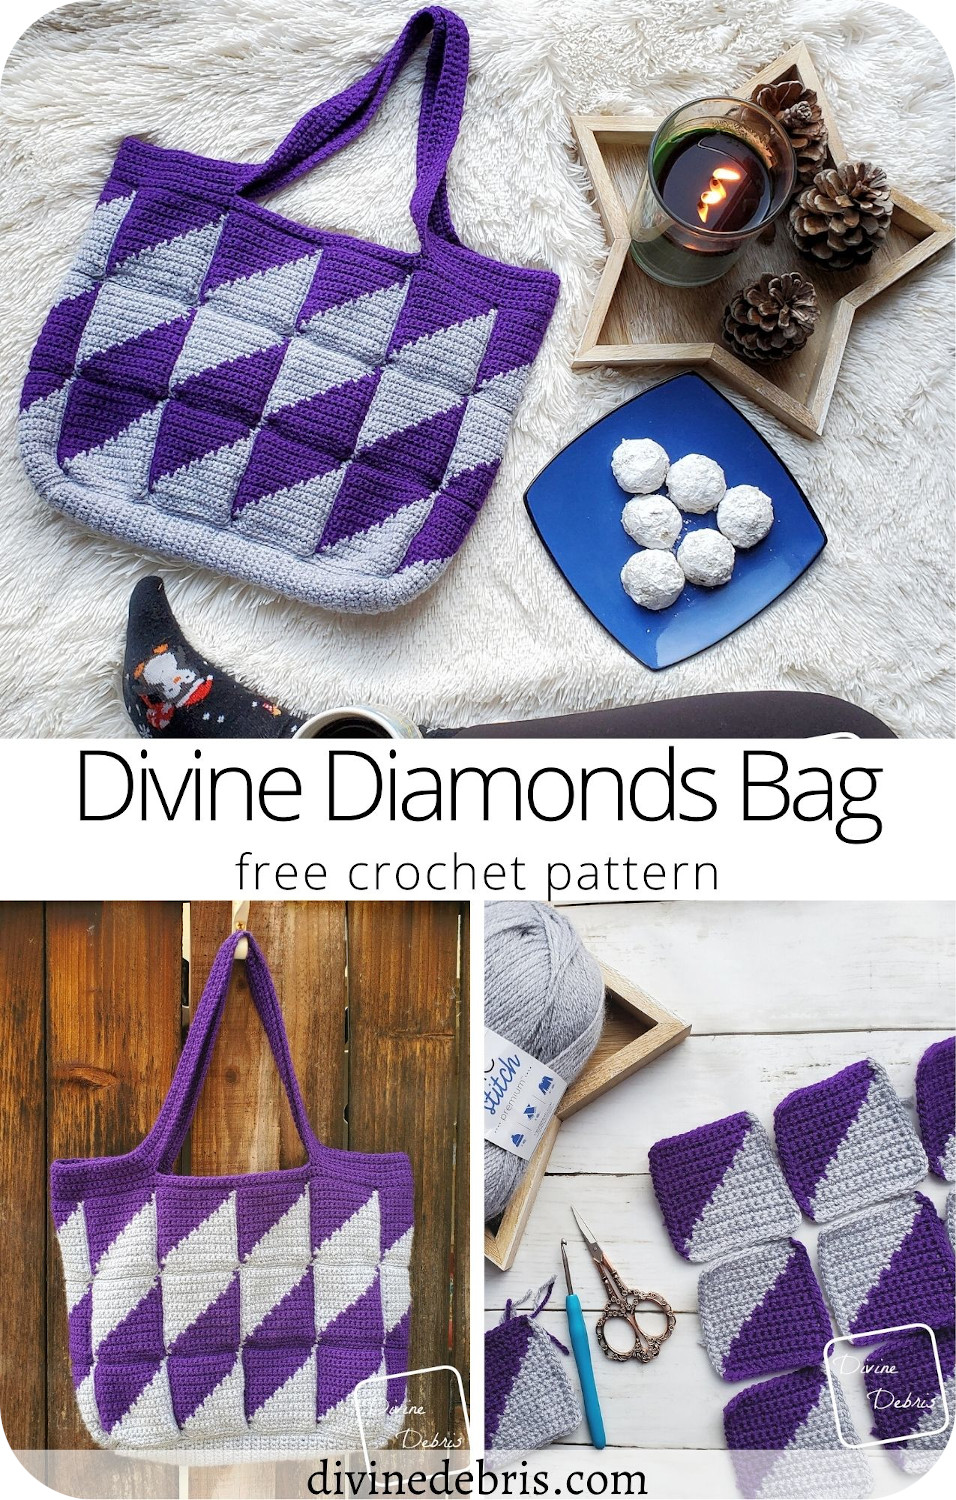 Make a striking bag that will get noticed everywhere you go with the Divine Diamonds Bag, a free crochet pattern by DivineDebris.com